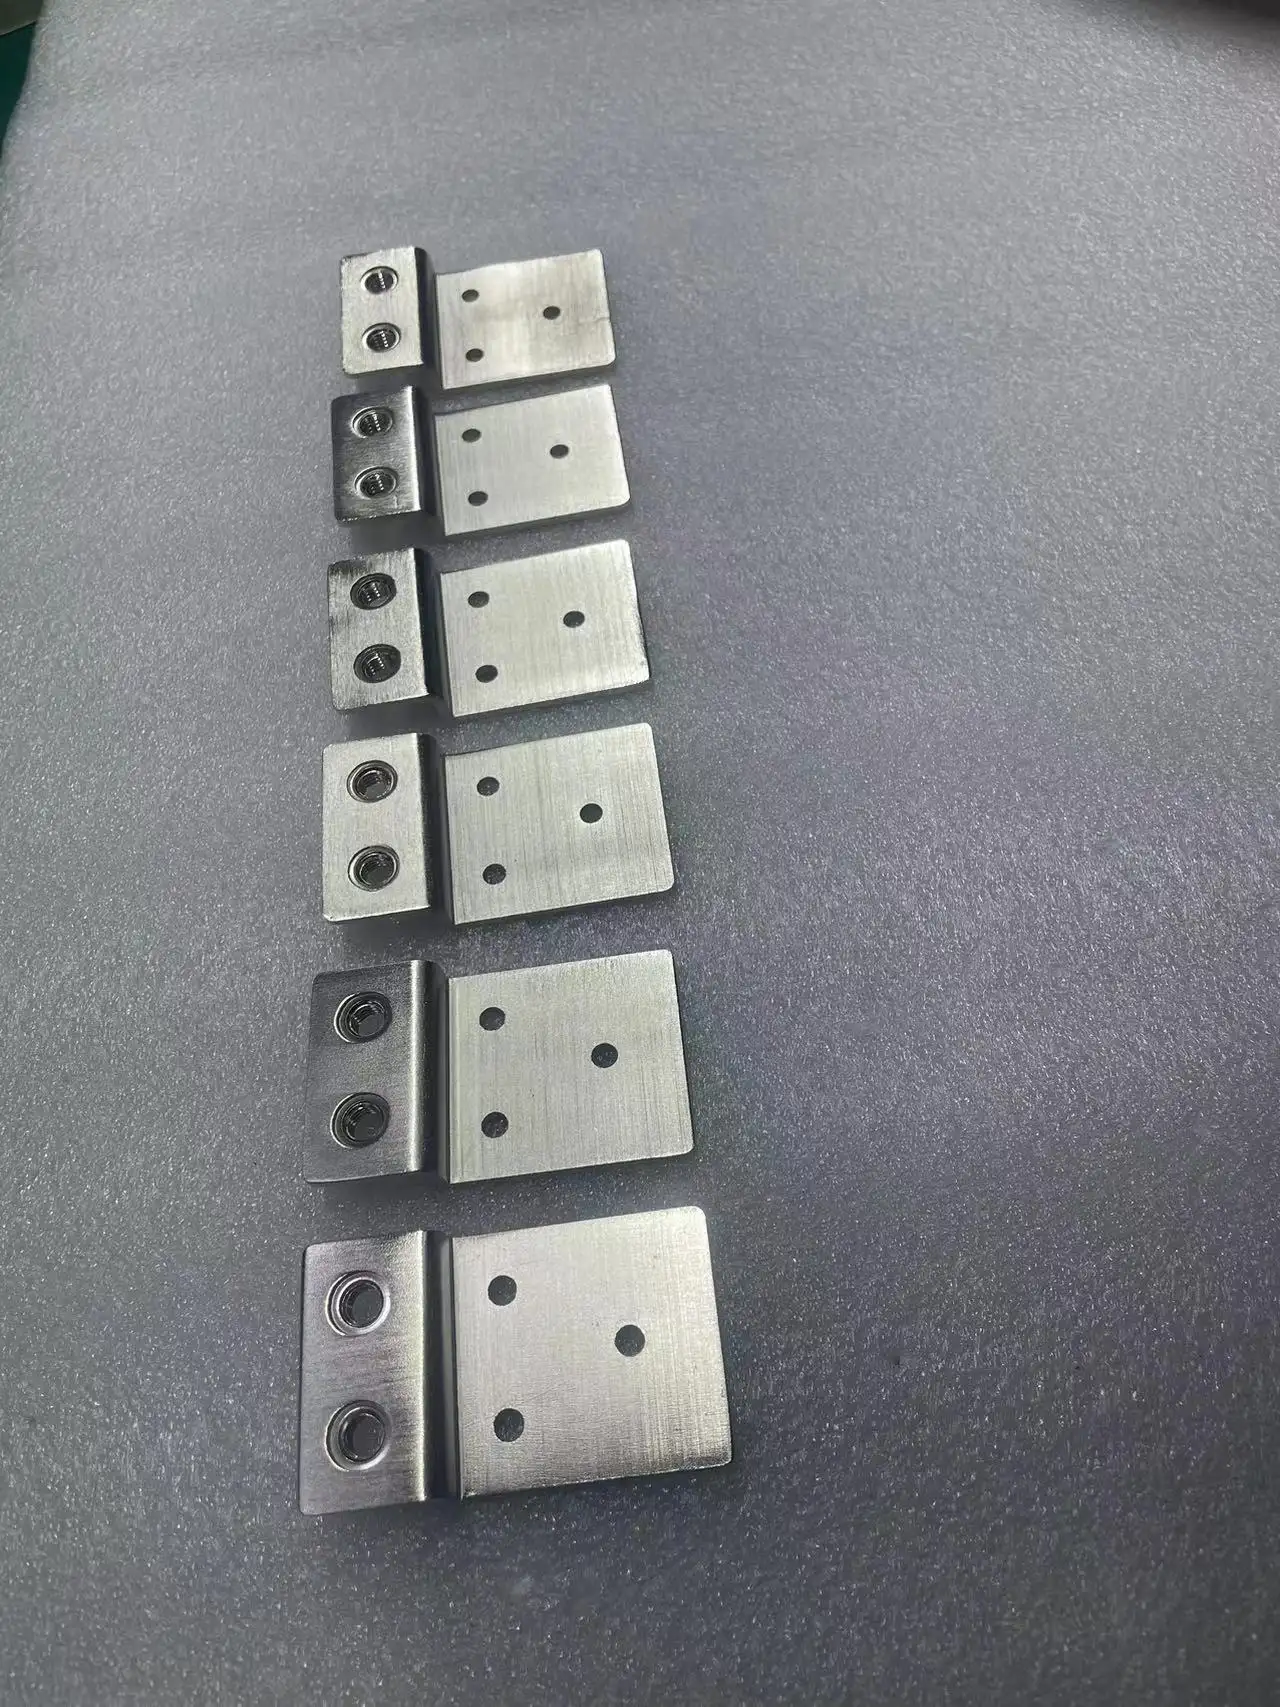 Connection tabsSeries busbarBattery pack connectionAluminum busbar